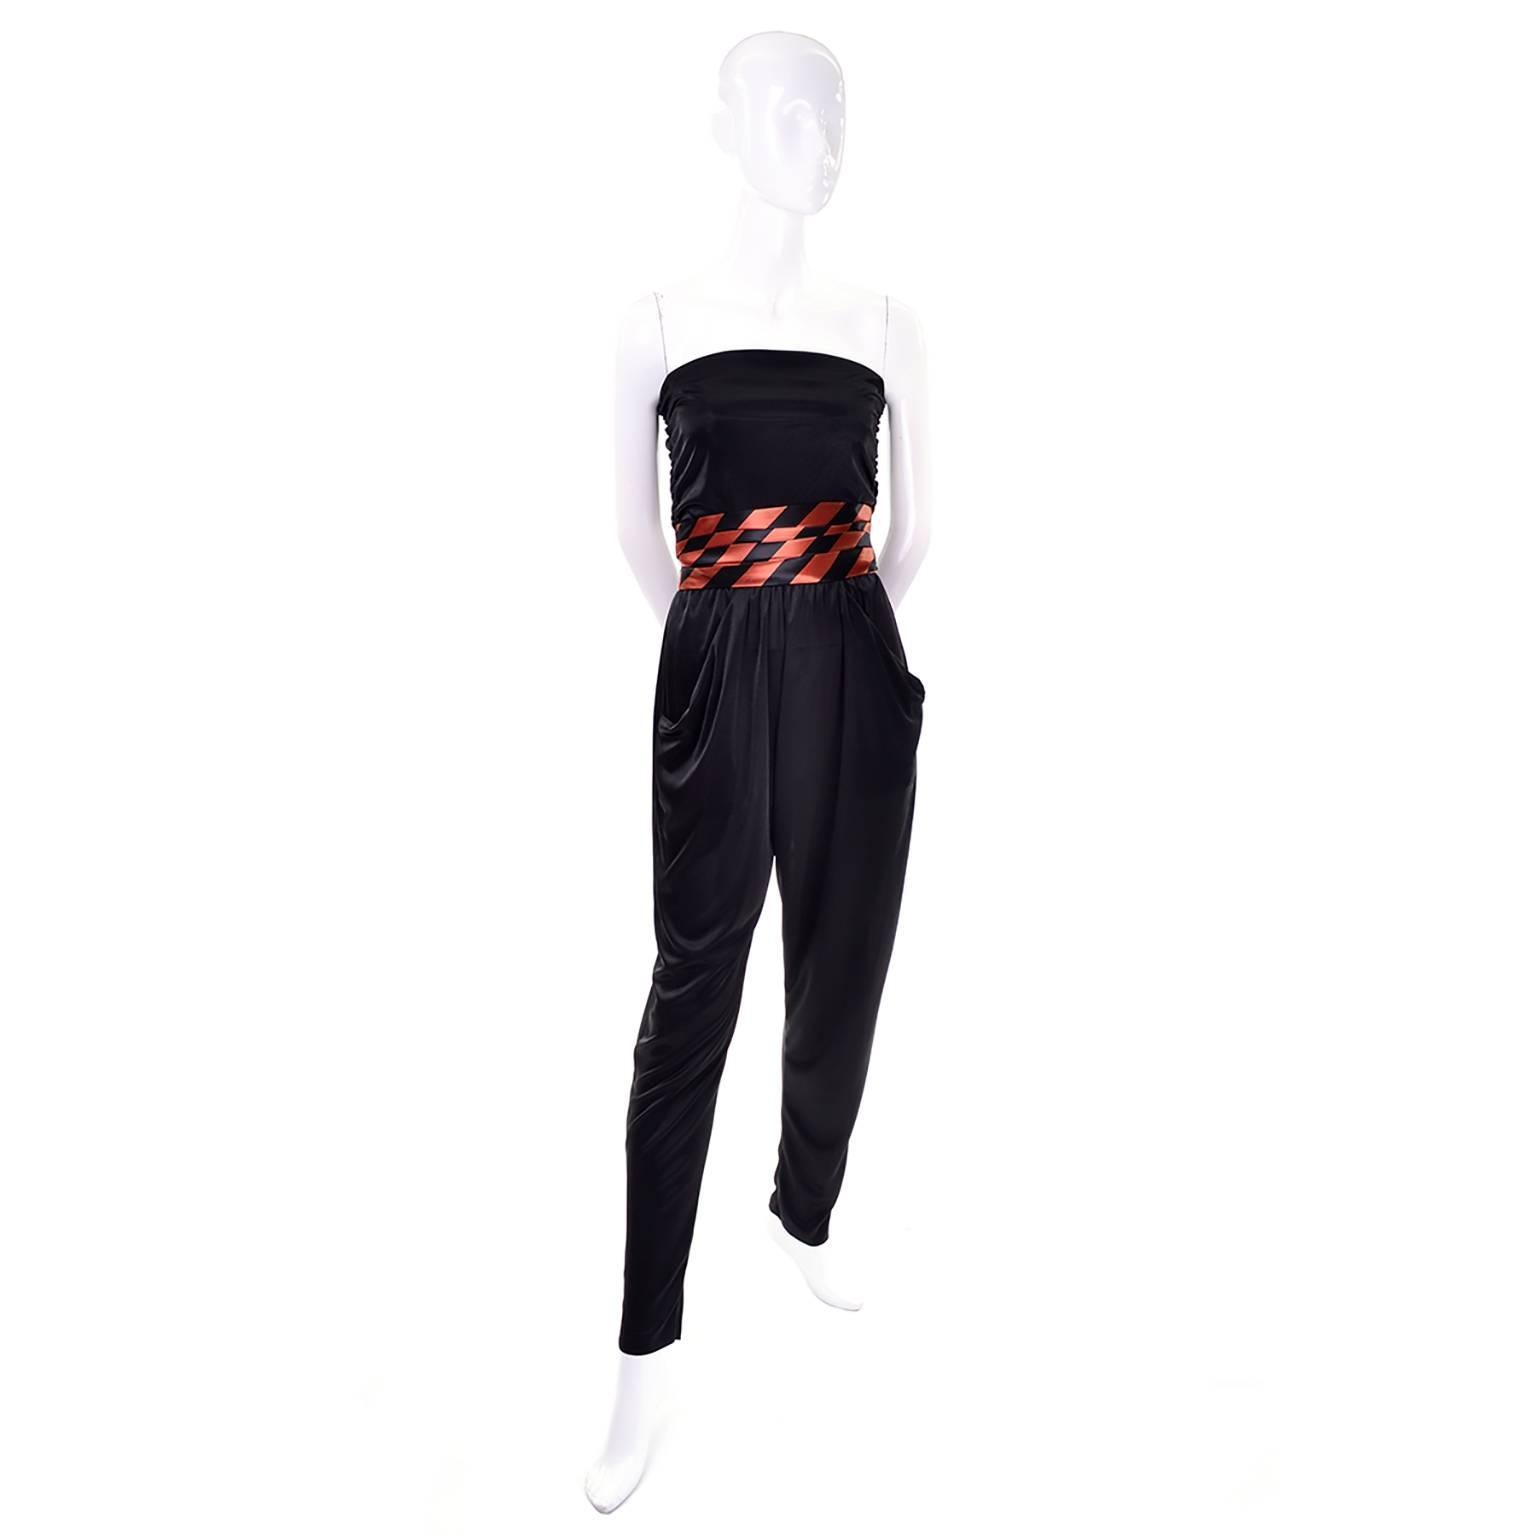 This 1970's vintage jumpsuit with a coordinating orange and black satin striped jacket and cummerbund is perfect for any Halloween or Fall party! The slinky black jersey jumpsuit is strapless with an elastic waist and slips on with no closures. The